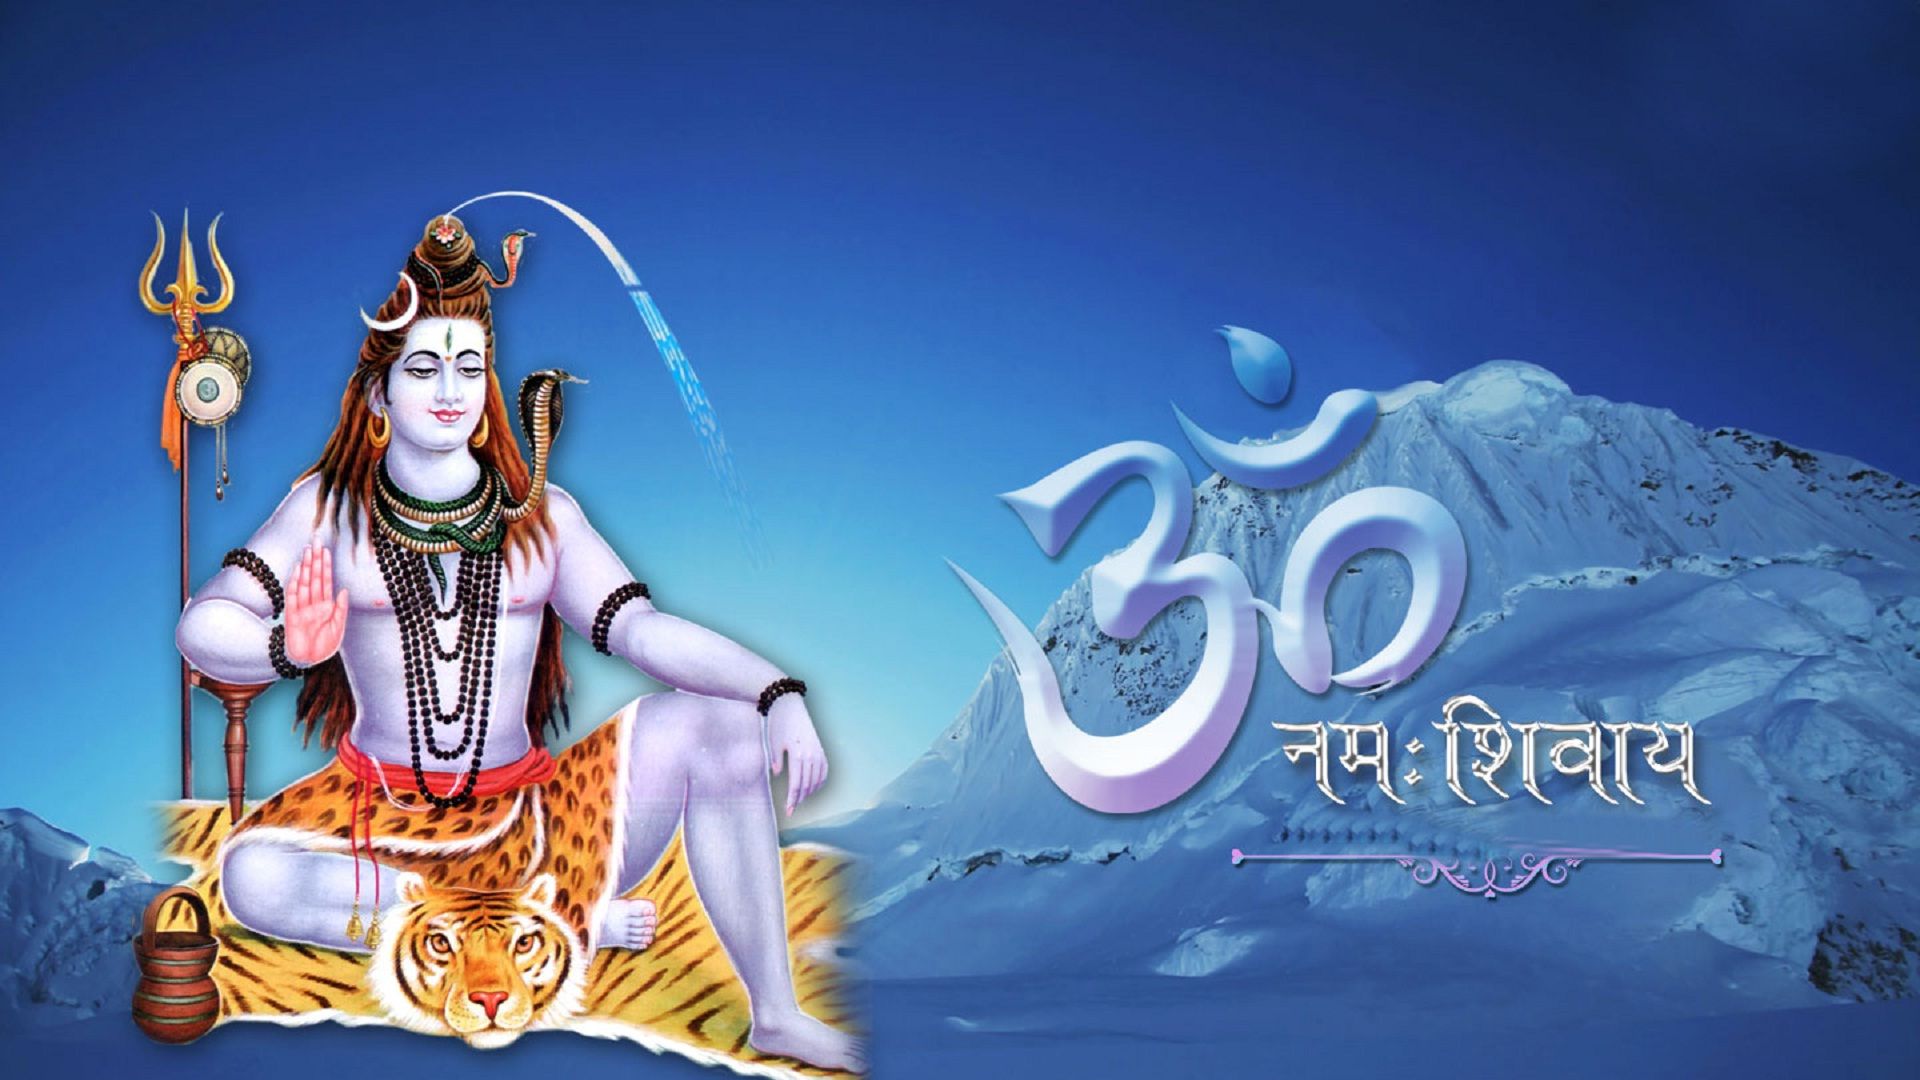 Lord Shiva Images For Whatsapp Dp - God HD Wallpapers